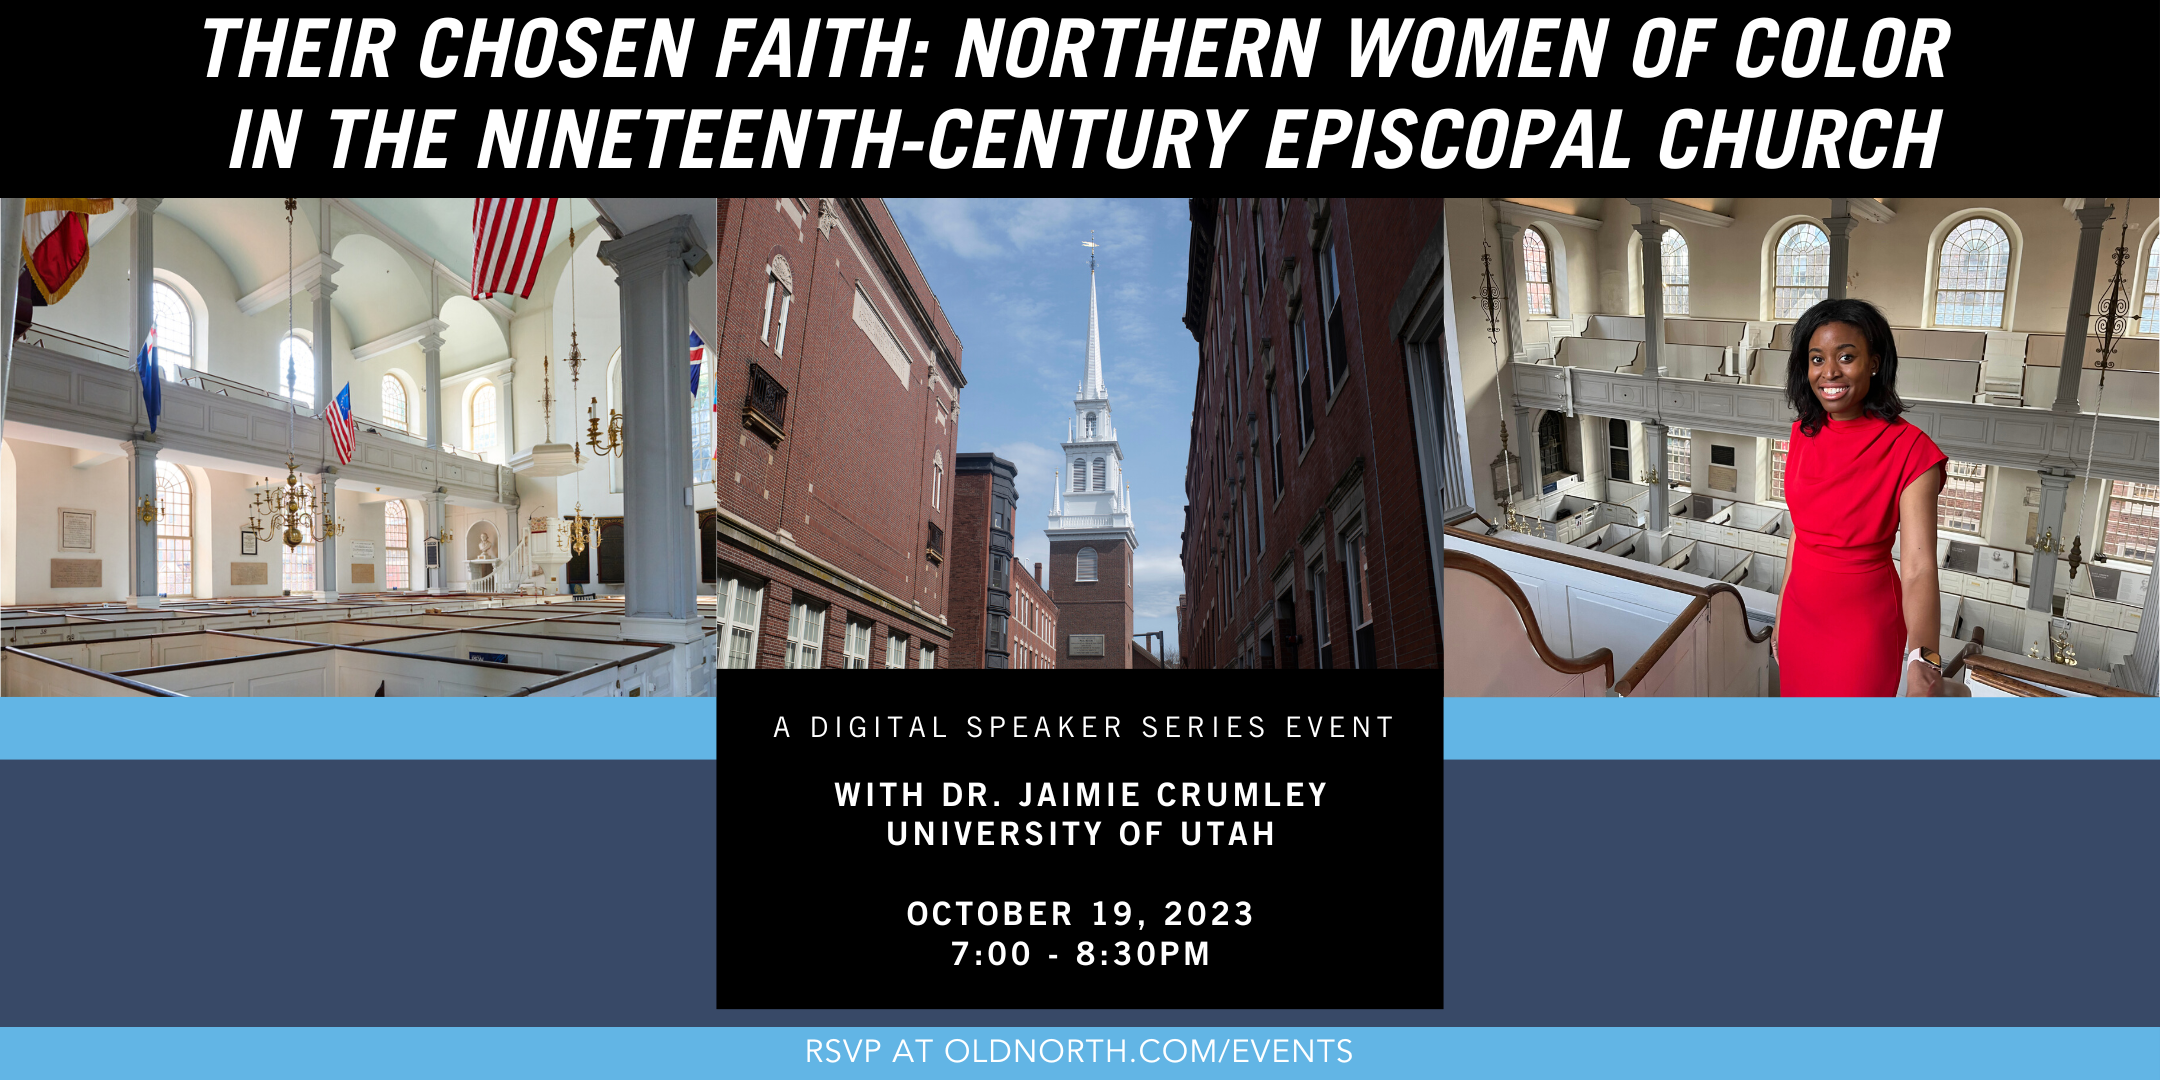 Their Chosen Faith Northern Women of Color in the Nineteenth-Century Episcopal Church